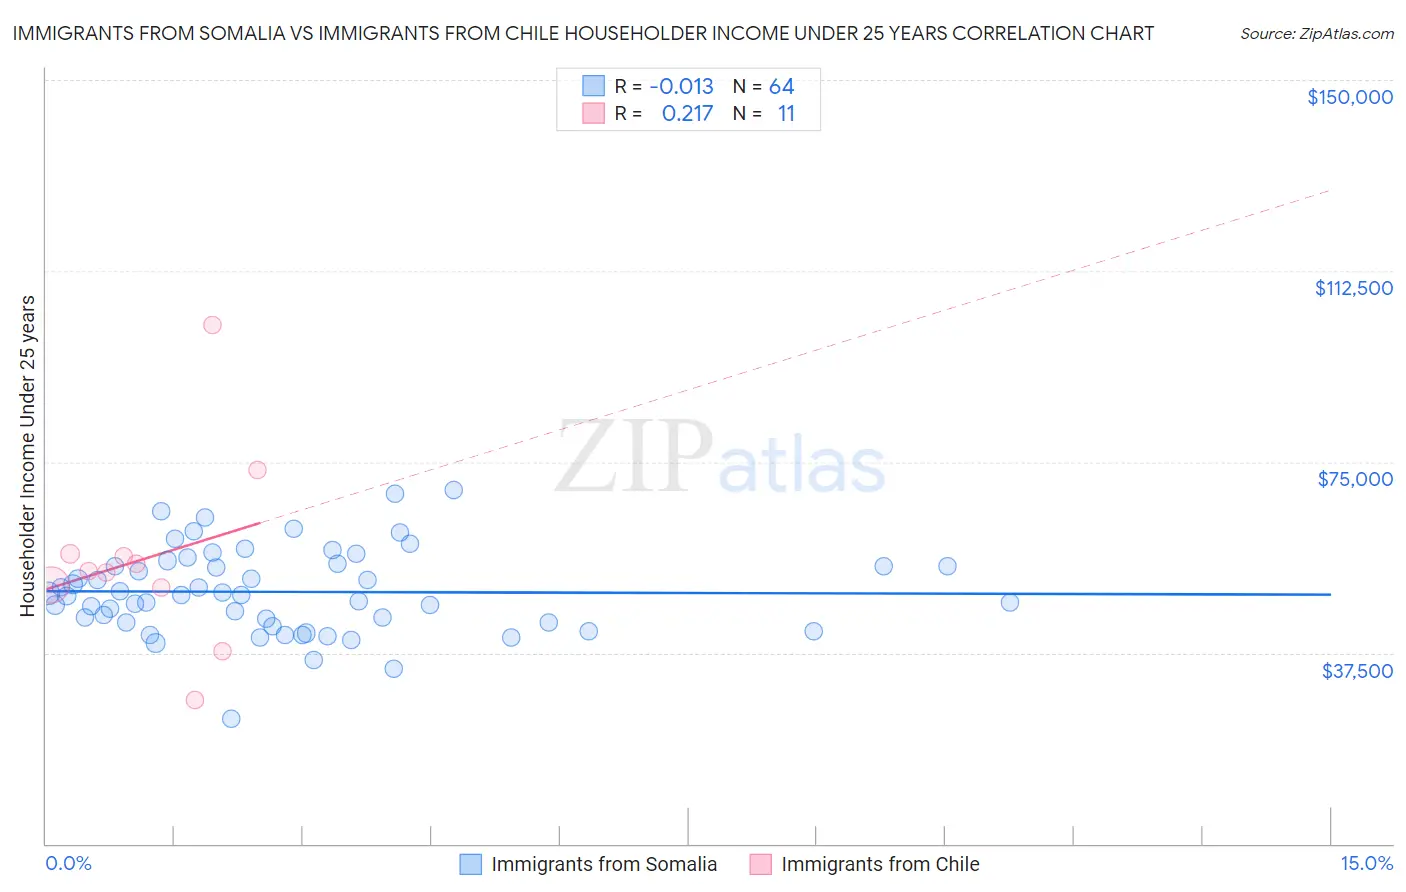 Immigrants from Somalia vs Immigrants from Chile Householder Income Under 25 years